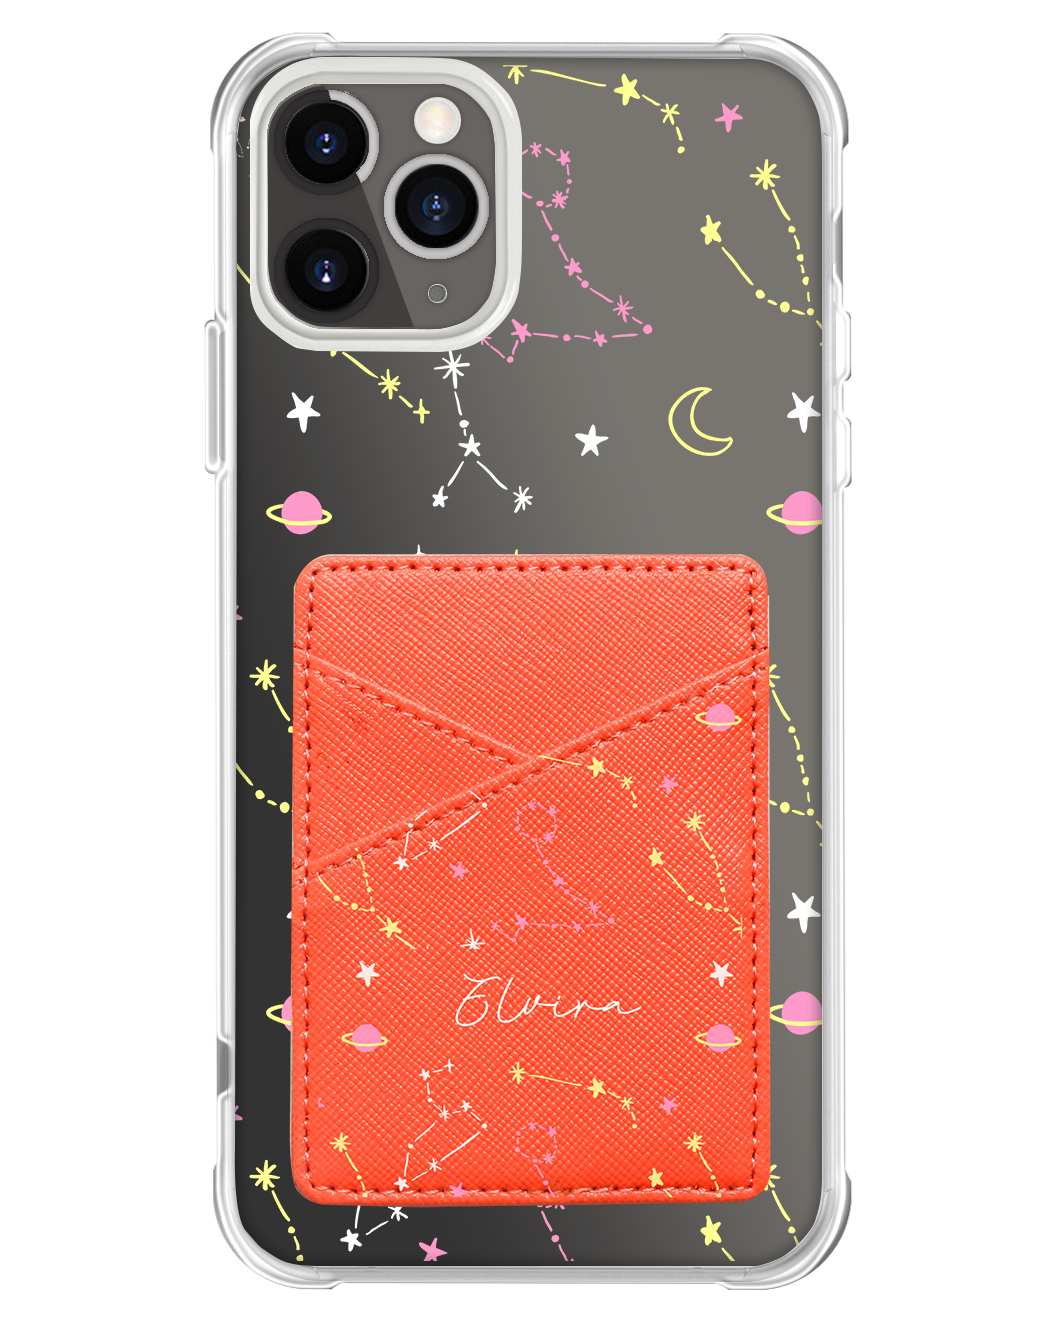 iPhone Phone Wallet Case - Constellation Candy